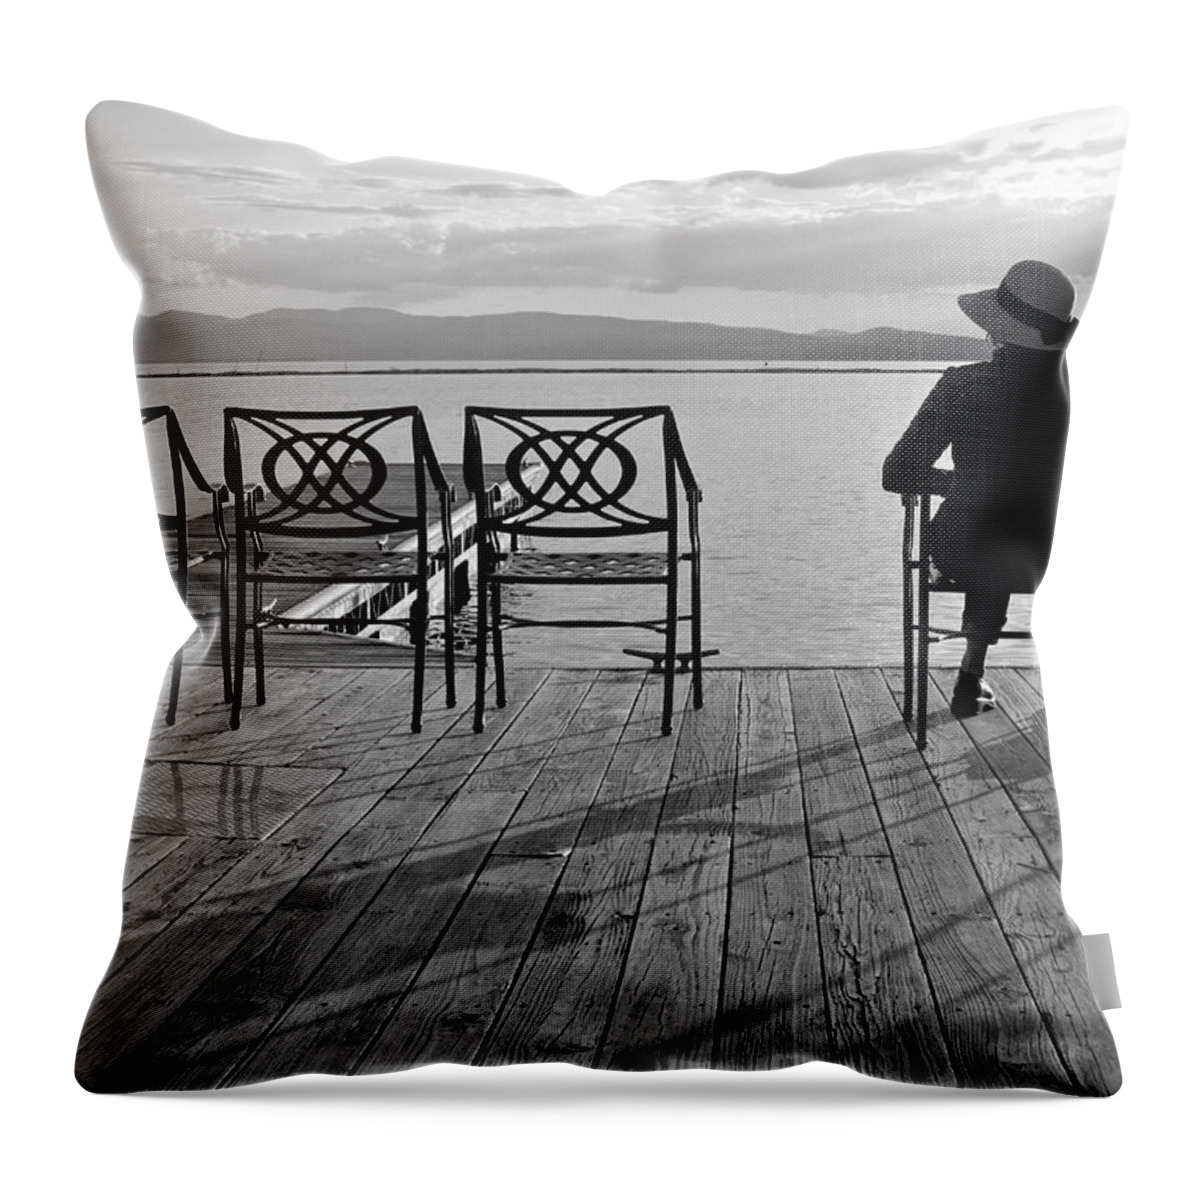 Black And White Throw Pillow featuring the photograph Dreamer by Mike Reilly